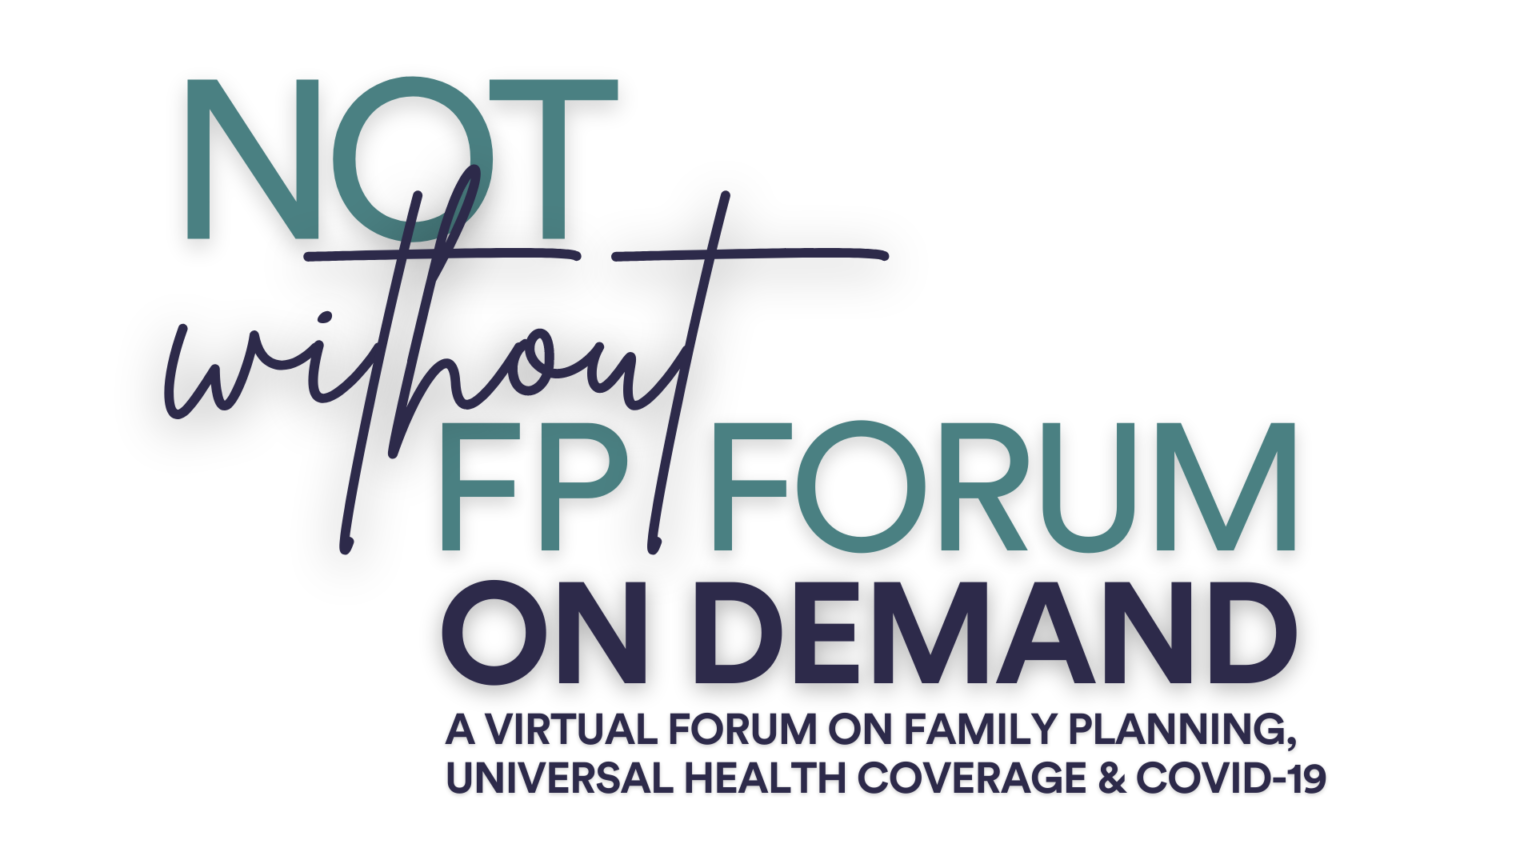 The International Conference on Family Planning’s On-Demand Virtual Forum